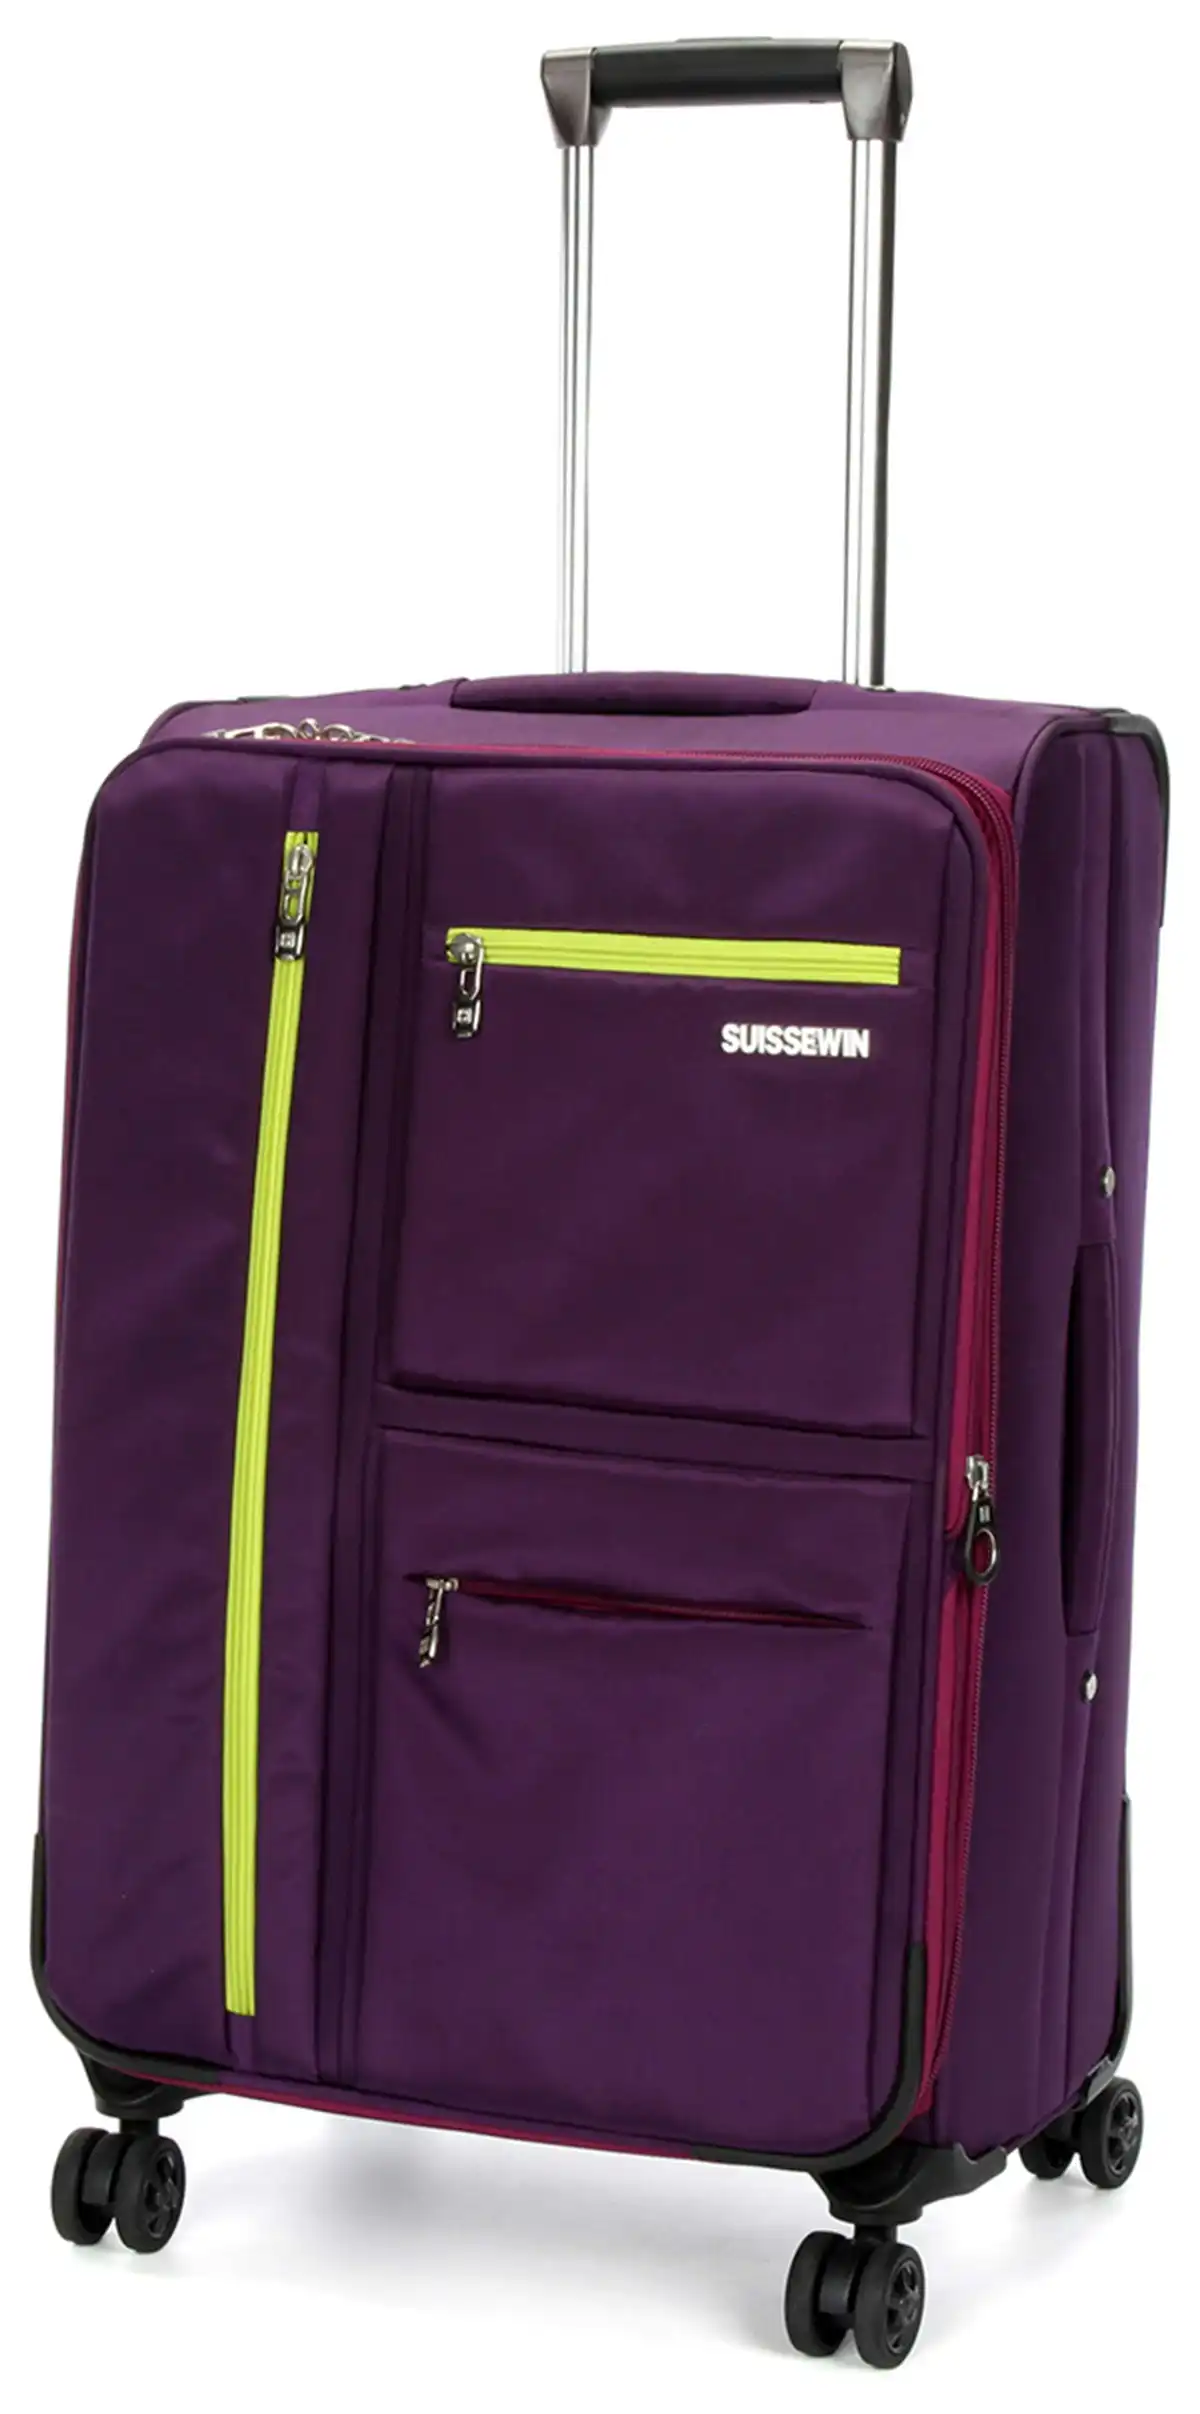 Suissewin Swiss Luggage Suitcase Lightweight 8 Wheels 360 Degree Rolling Carry on Softcase SN6007A Purple